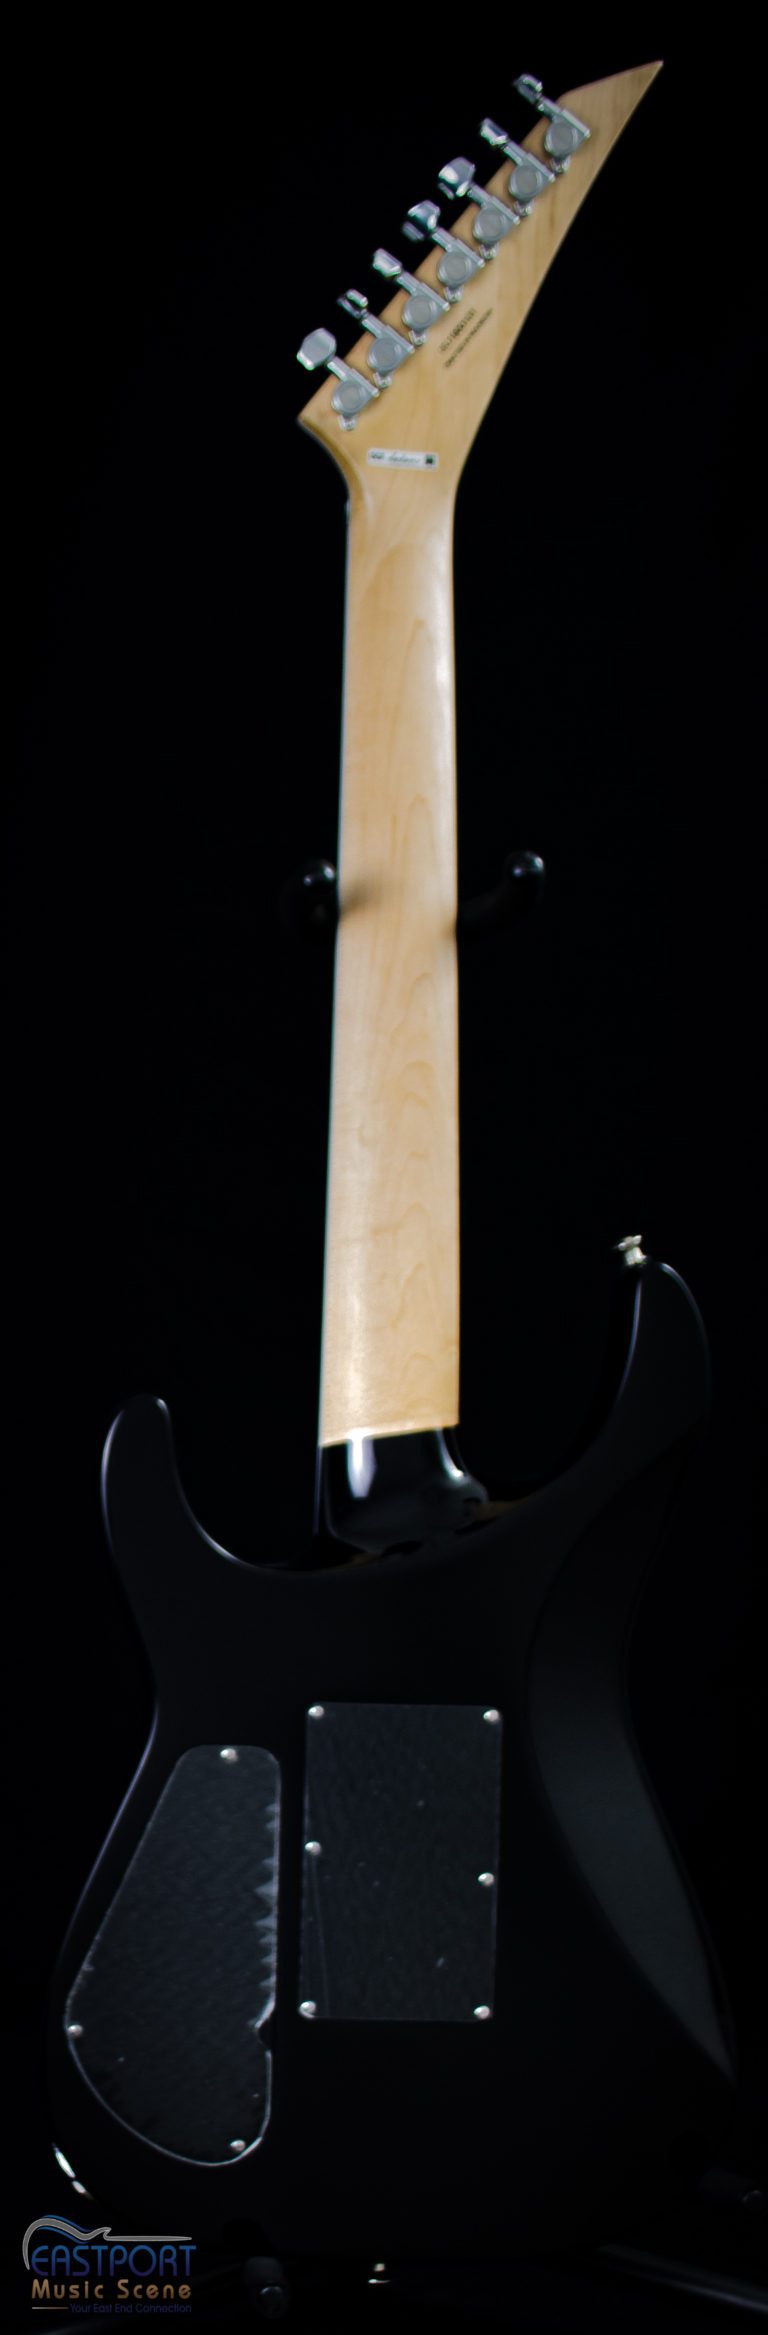 A black guitar with a white handle and a black neck